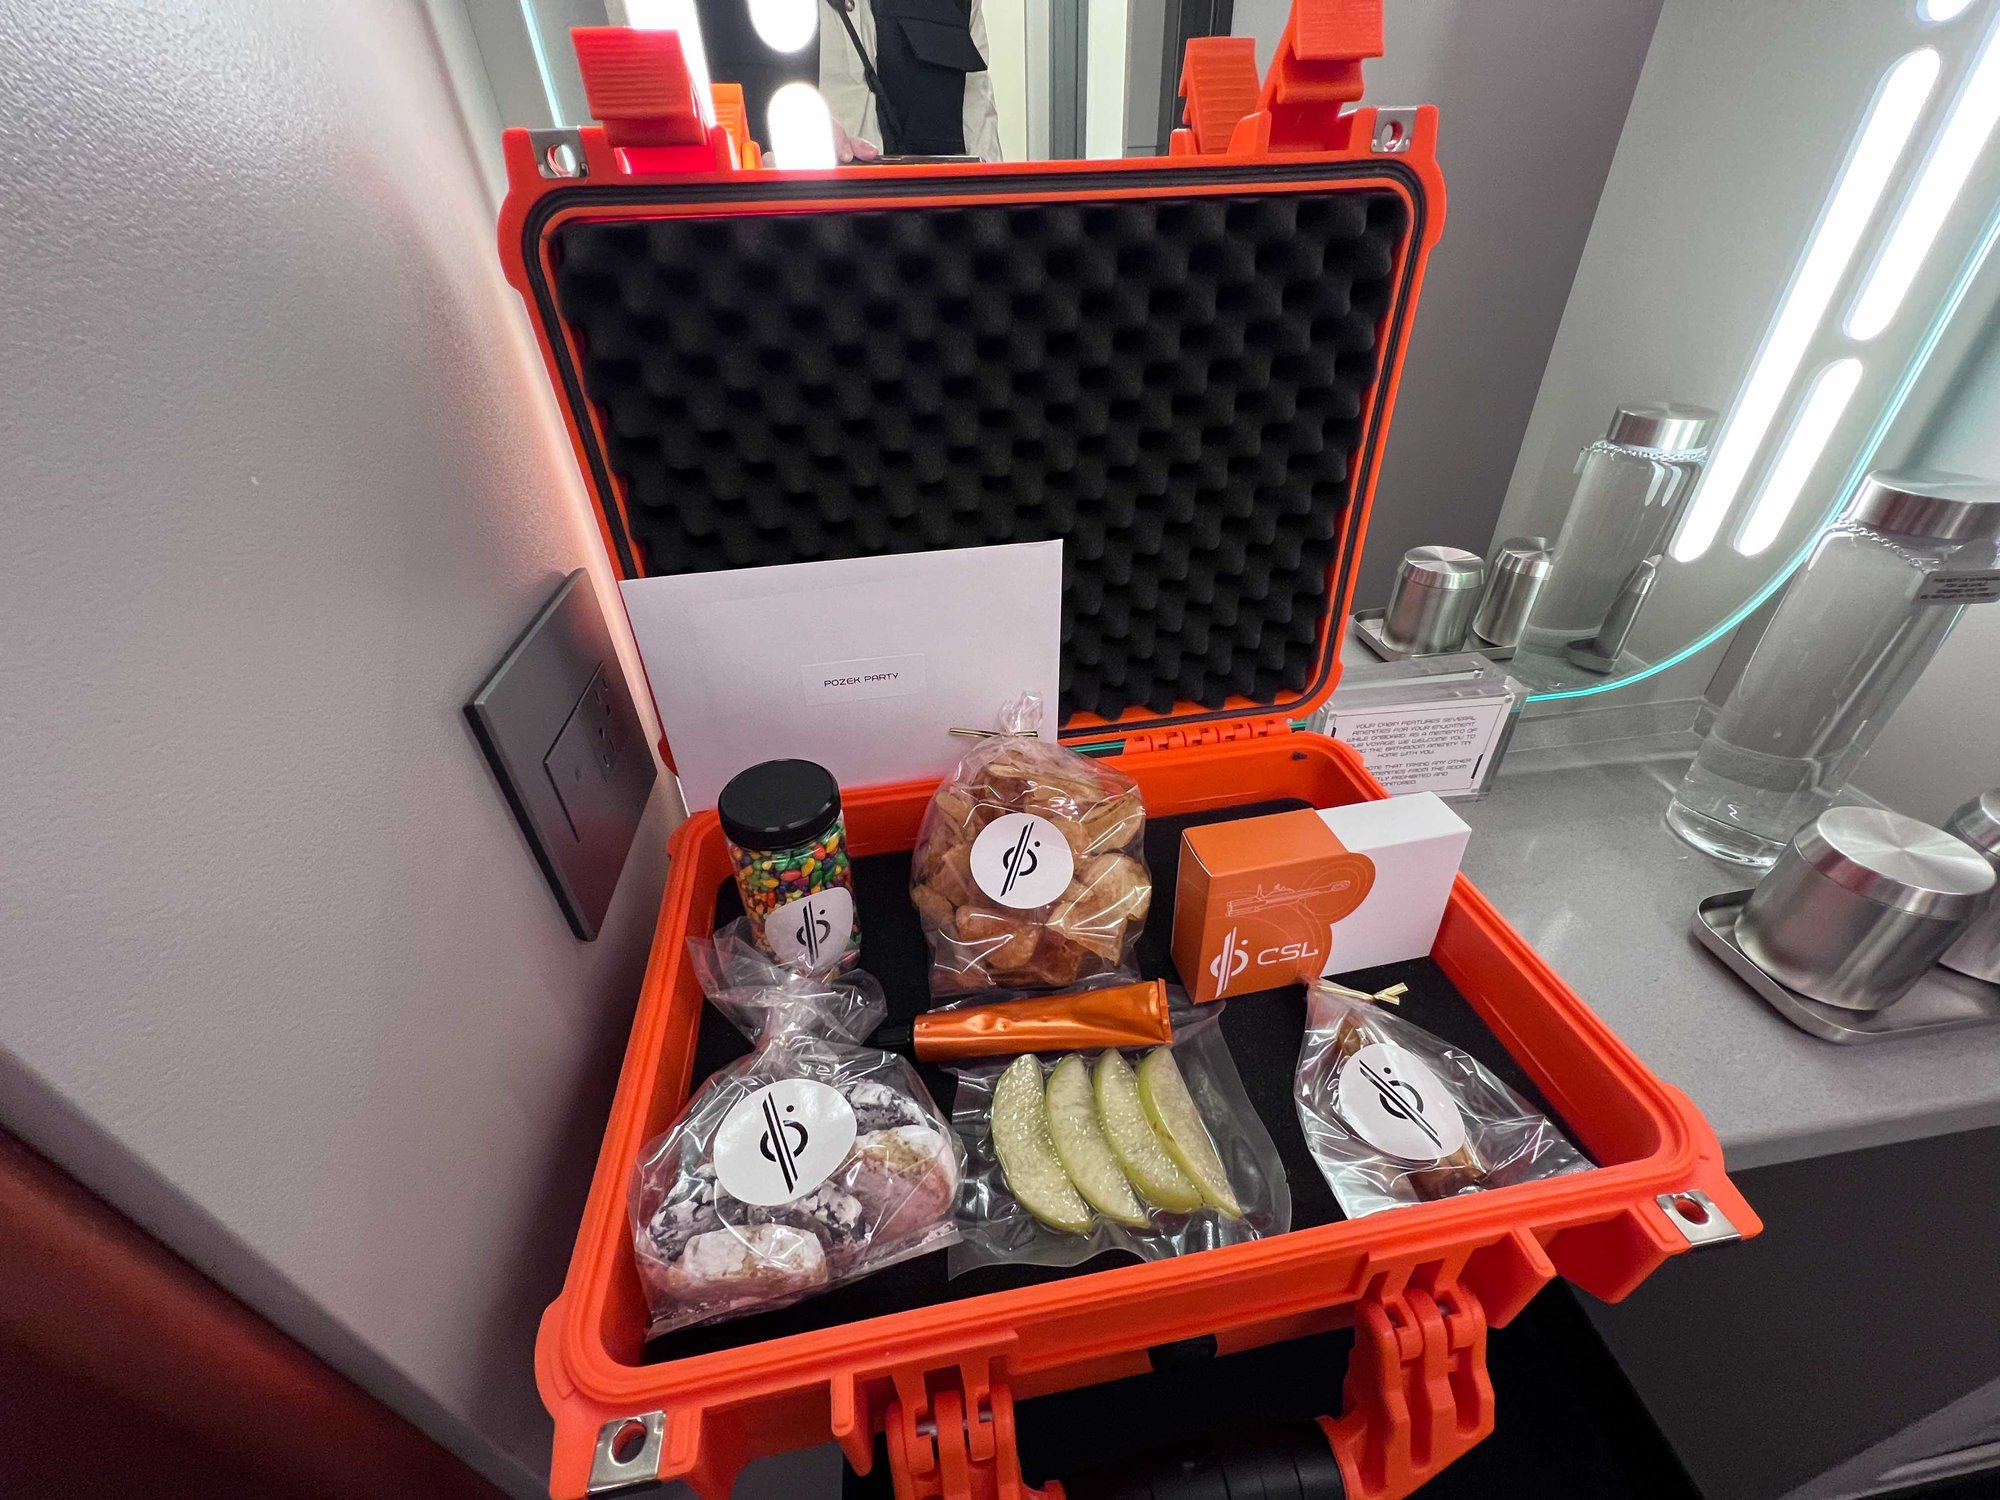 orange shipping container with space treats wrapped in plastic